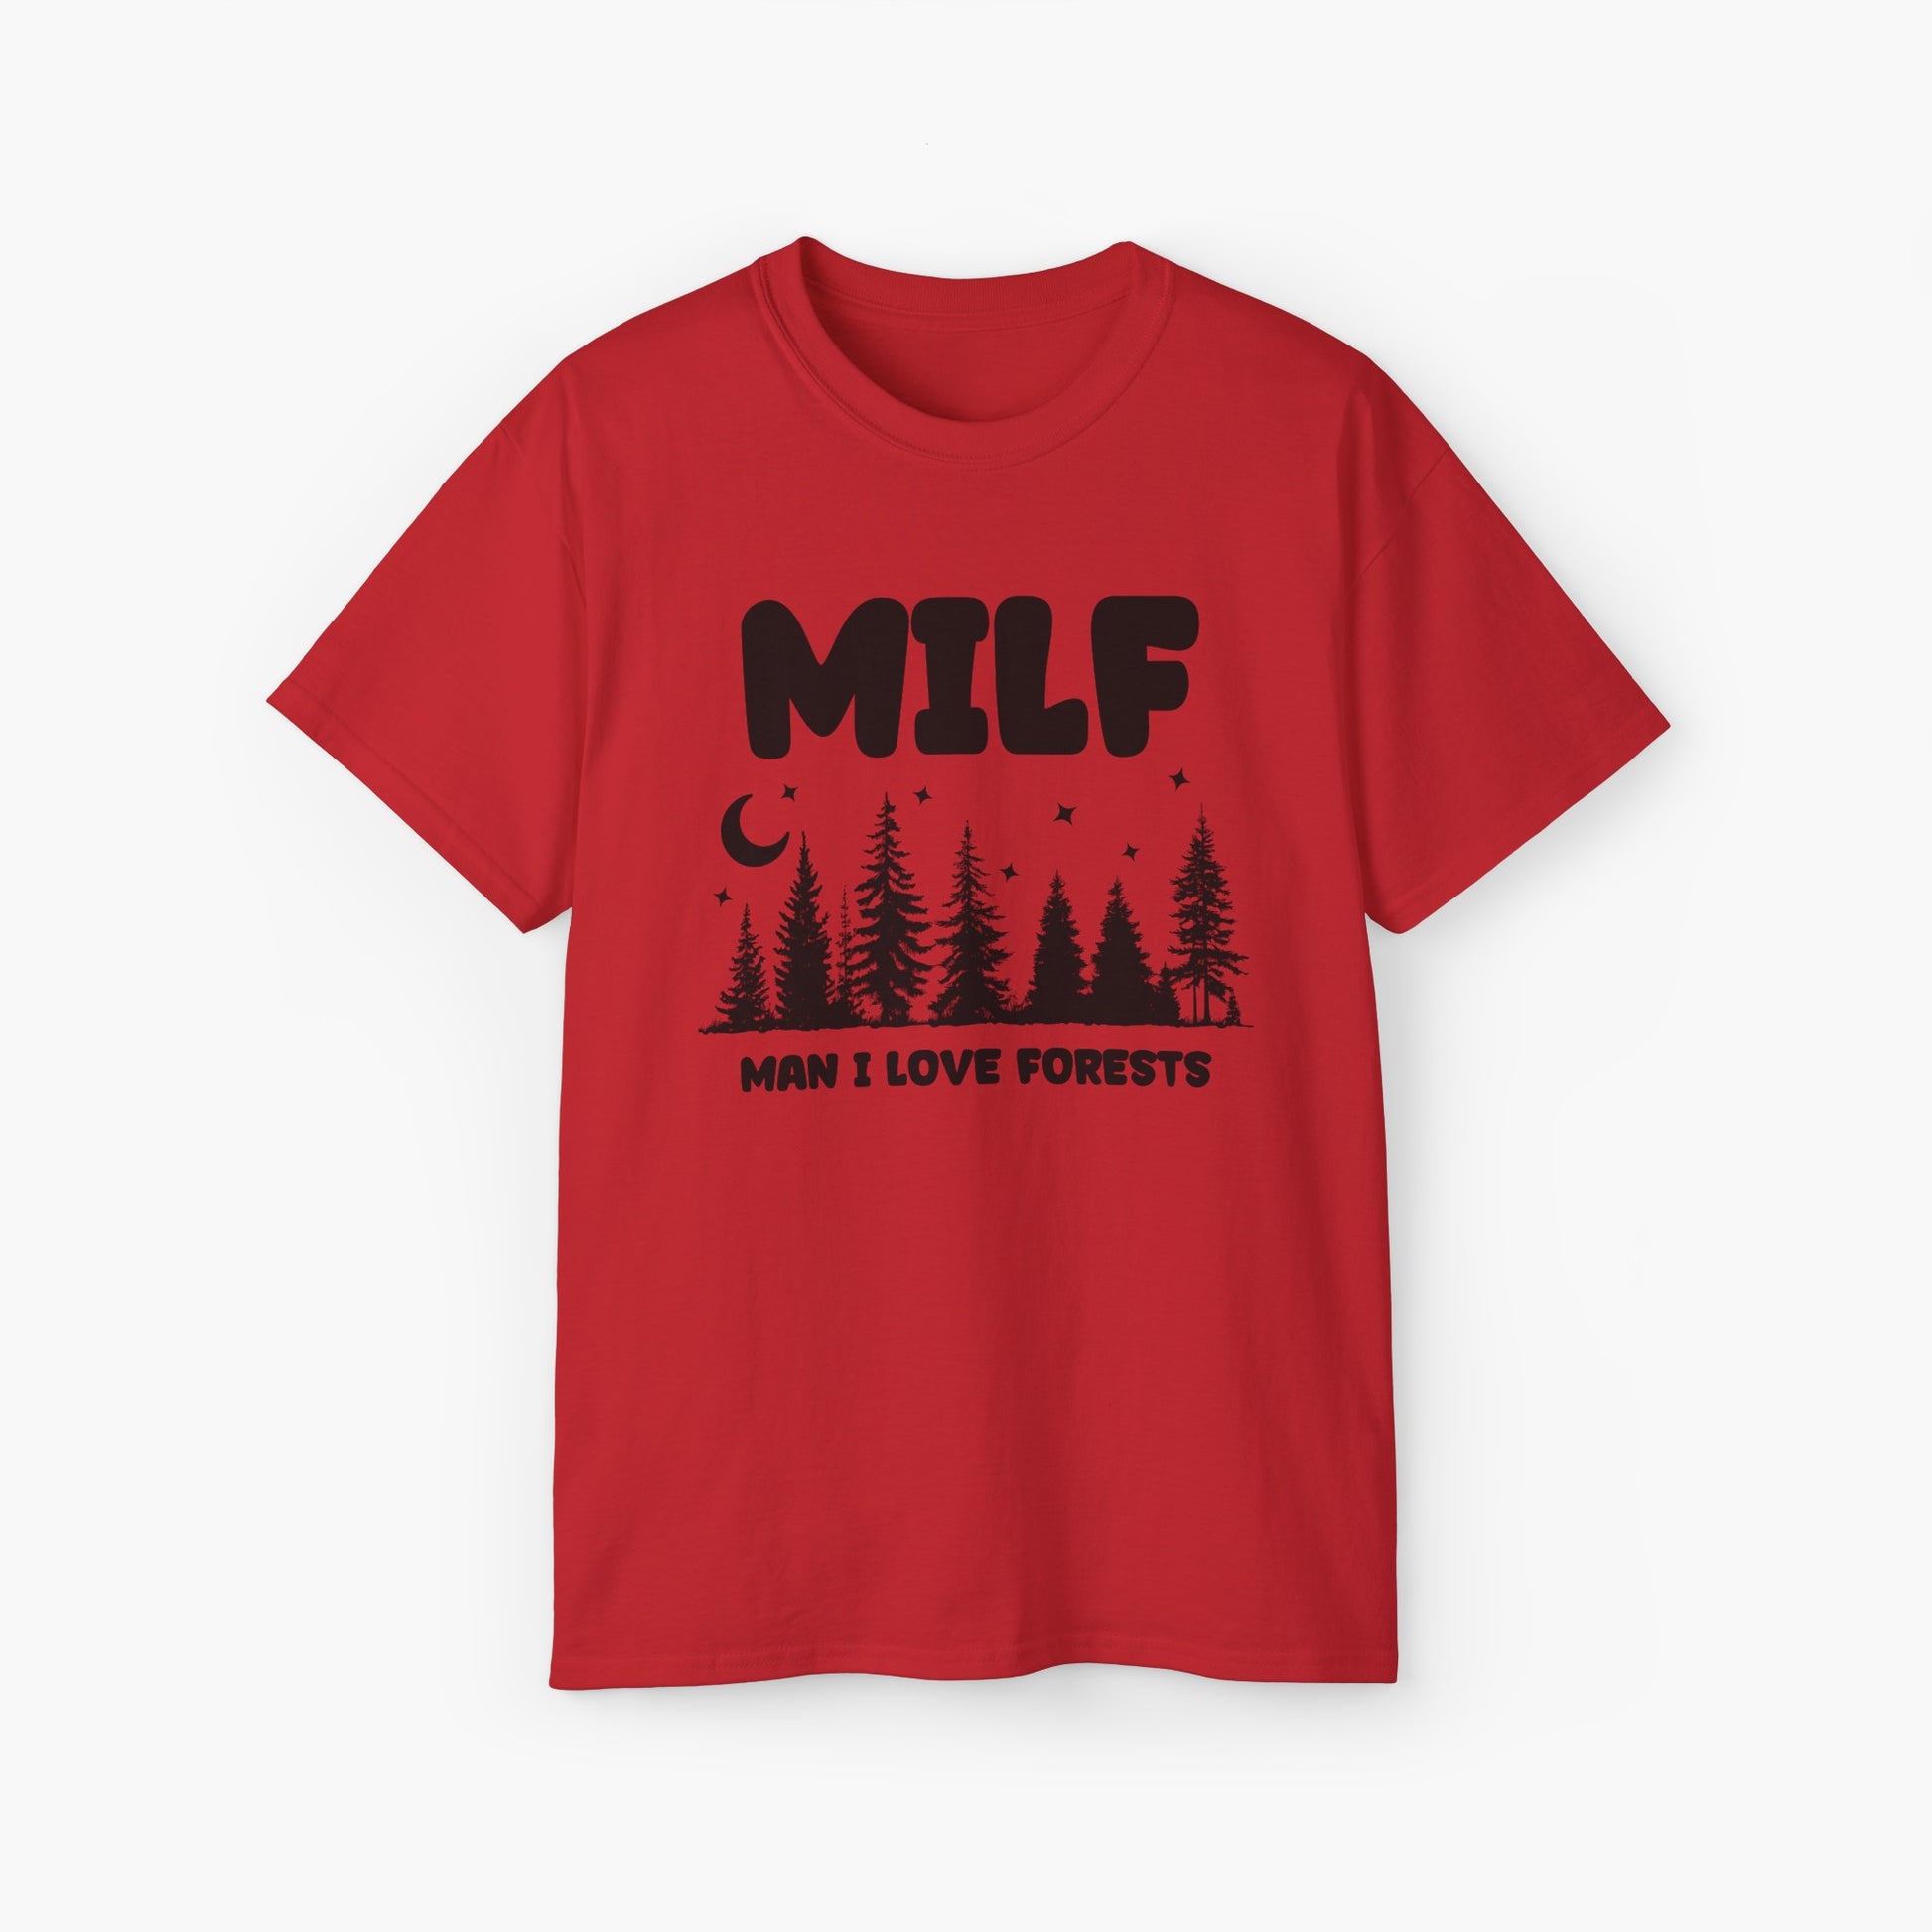 Red t-shirt with the text 'MILF, Man I Love Forests,' featuring trees, stars, and a moon on a plain background.